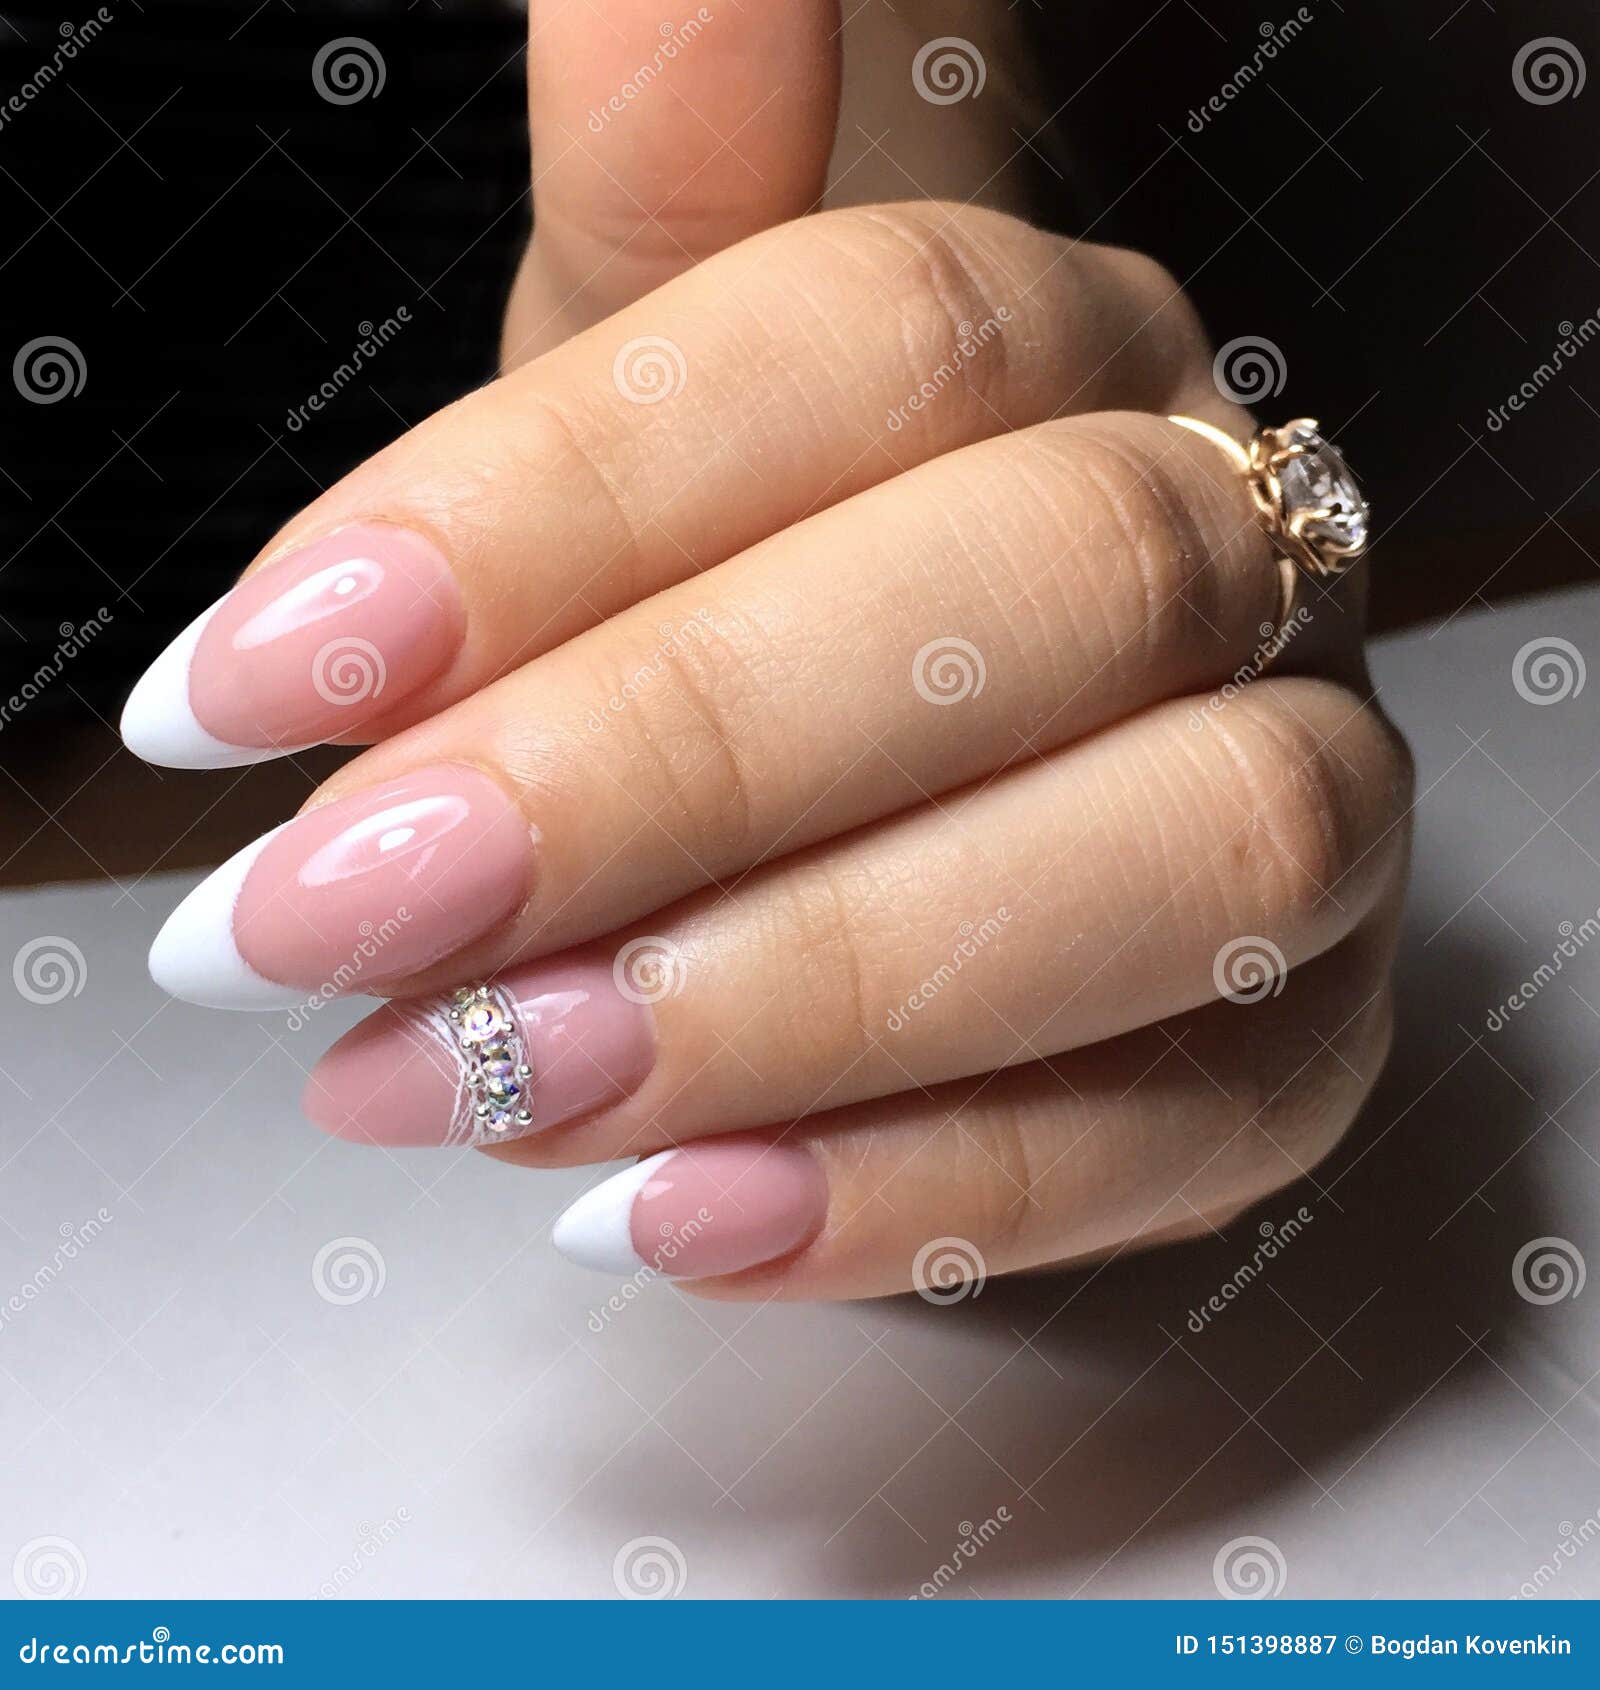 French Manicure on the Nails. French Manicure Design Stock Image - Image of  fingernail, nails: 151398887